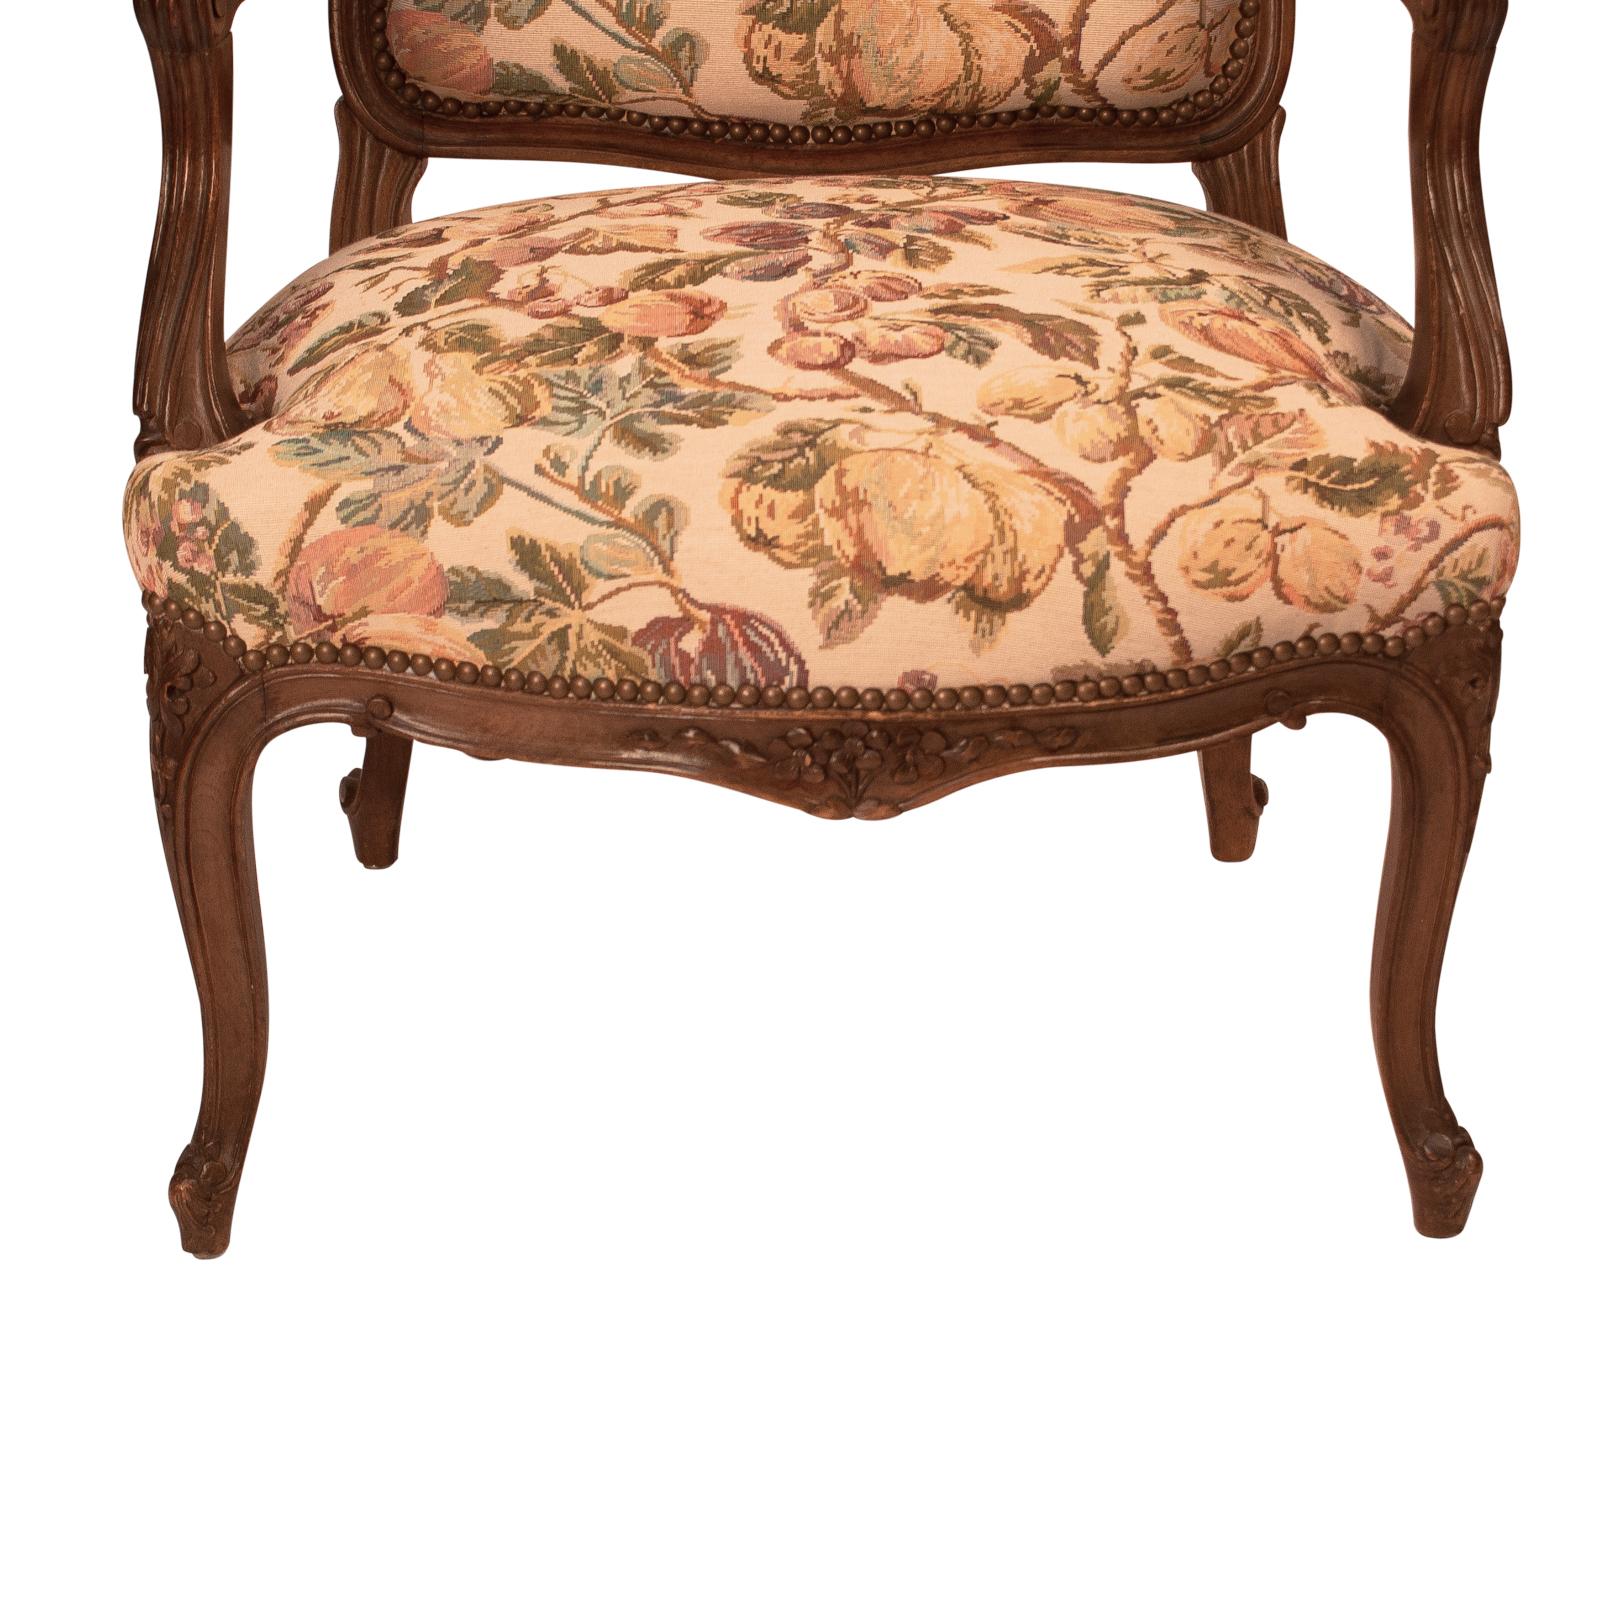 Upholstery Pair of Belle Epoque Armchairs, France, circa 1900